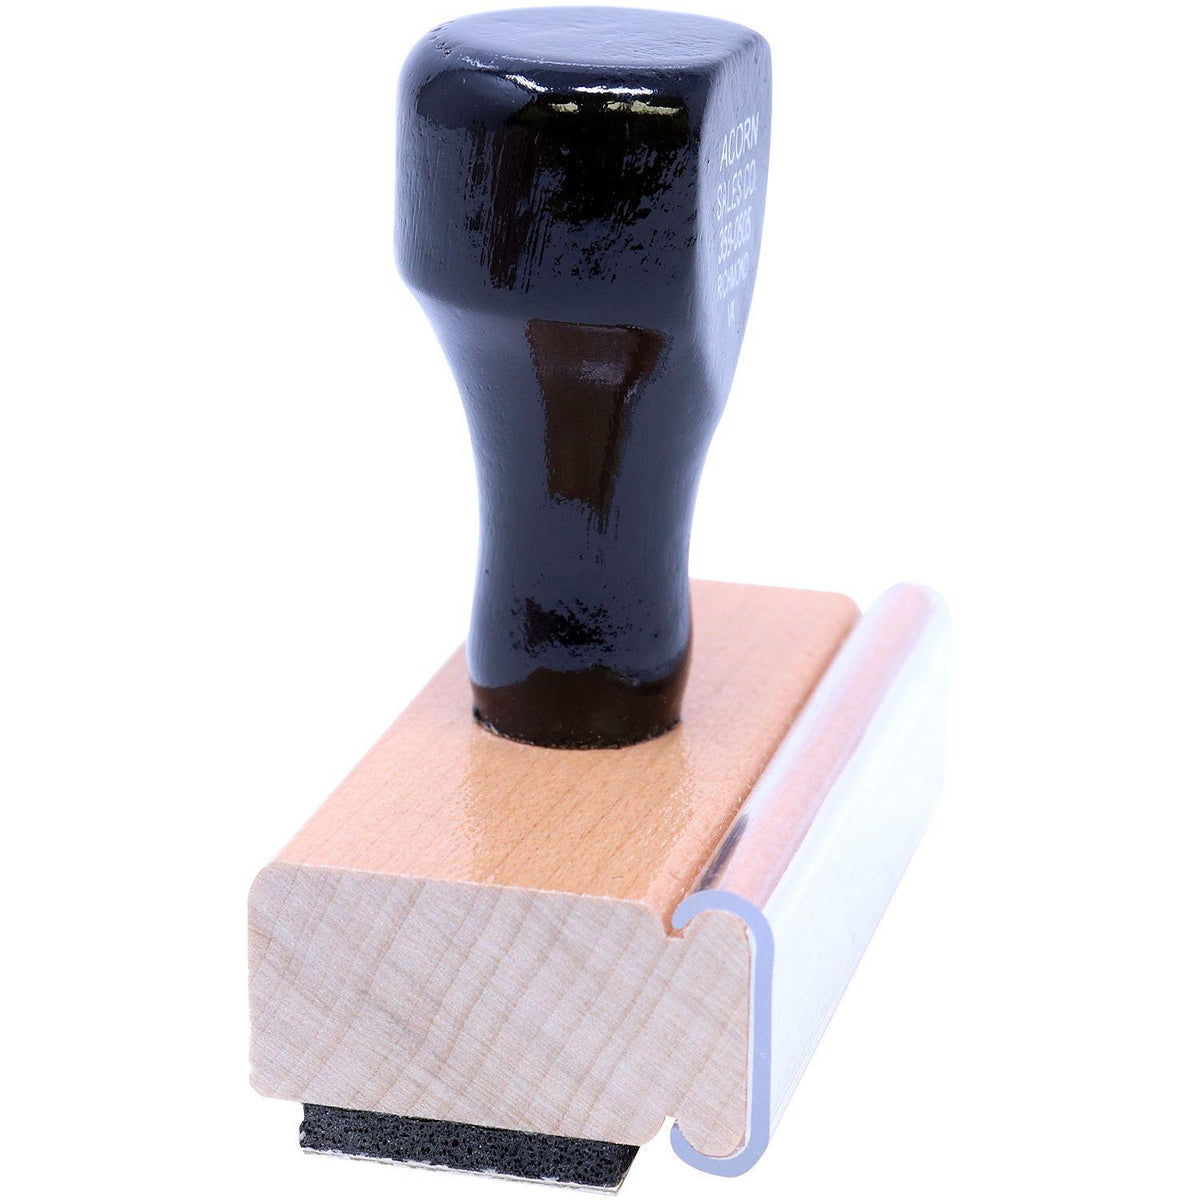 Side View of Large Ppo Rubber Stamp at an Angle